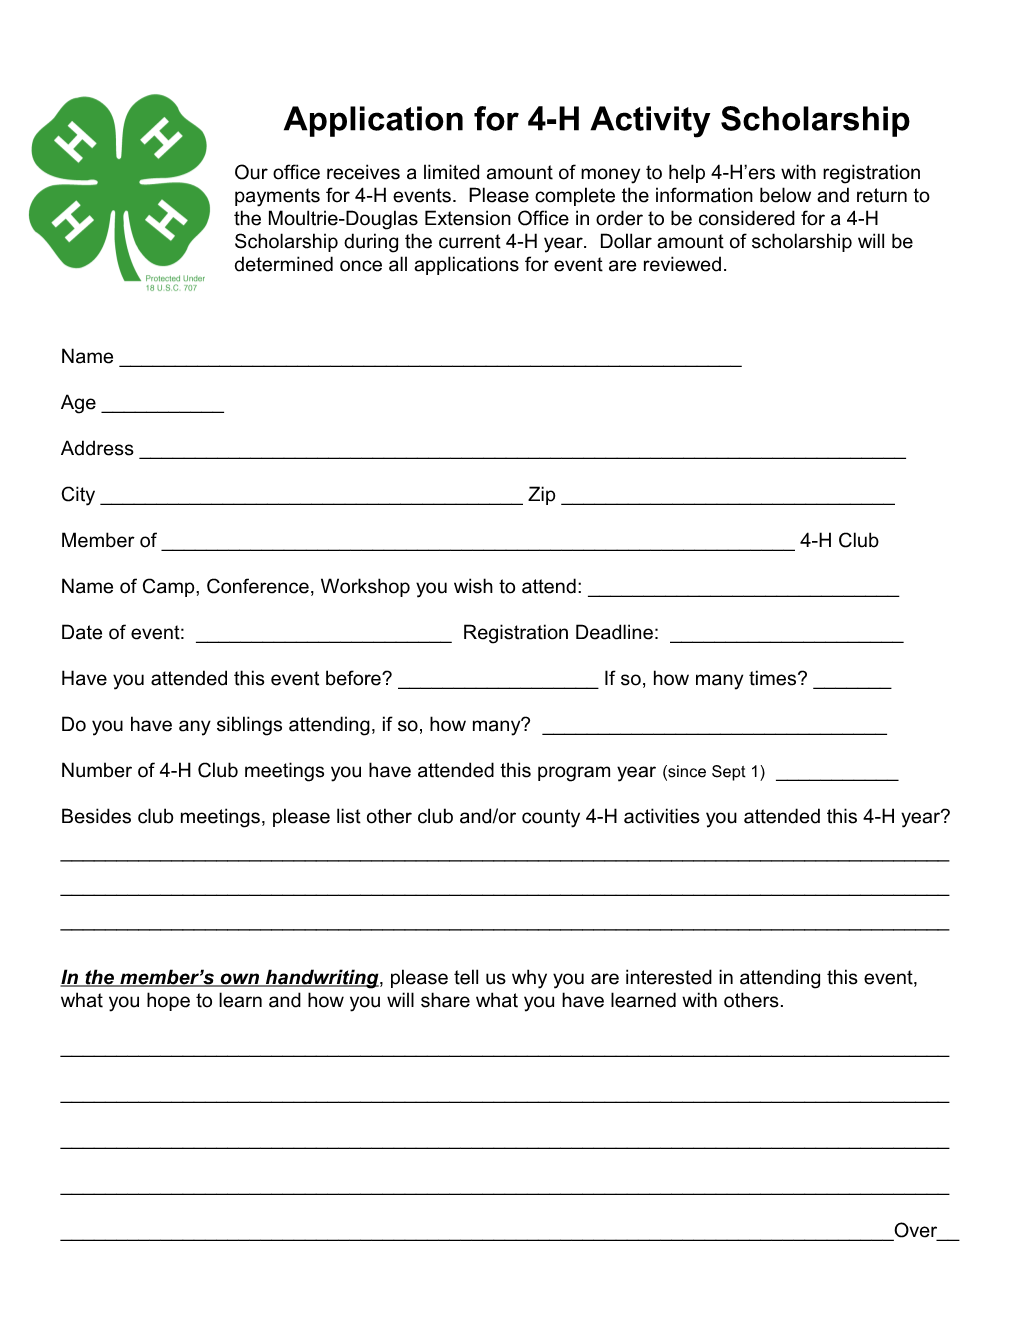 Application for 4-H Camp Scholarship